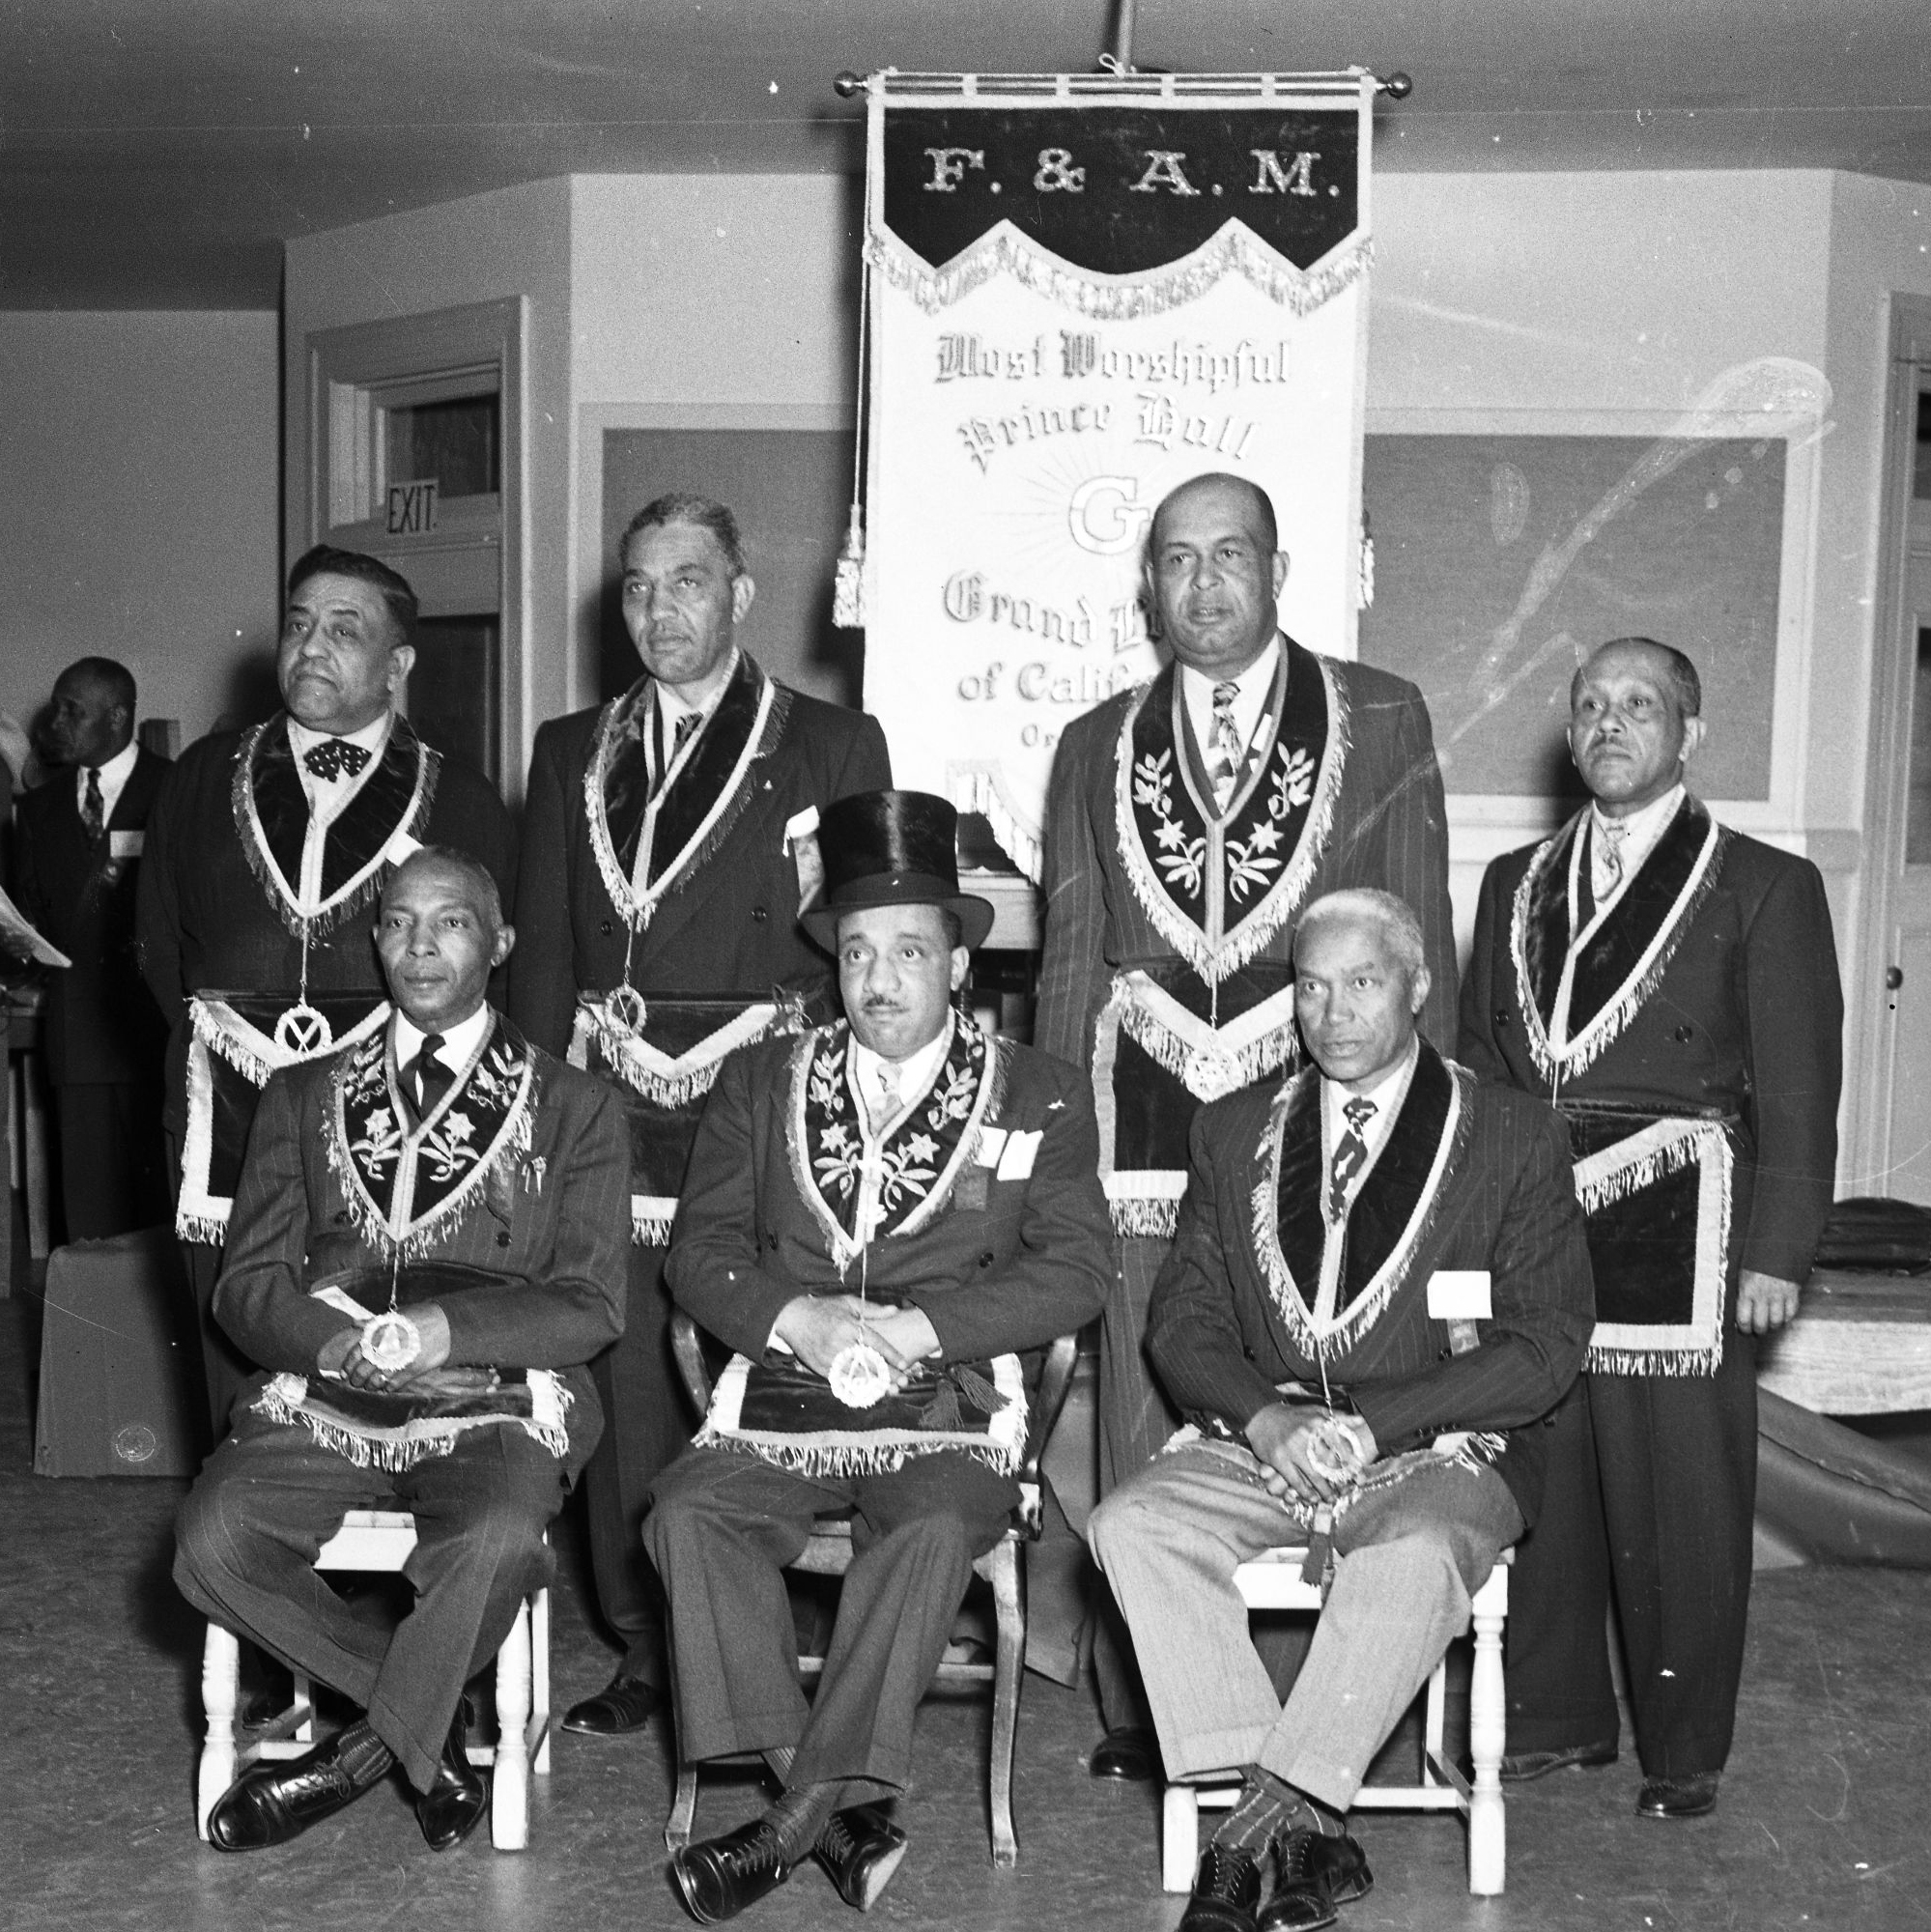 Prince Hall Masons pose in this archival photo. Prince Hall Masonry (also called Prince Hall Freemasonry) is a centuries-old Black fraternal order that today partners with the Masons of California.